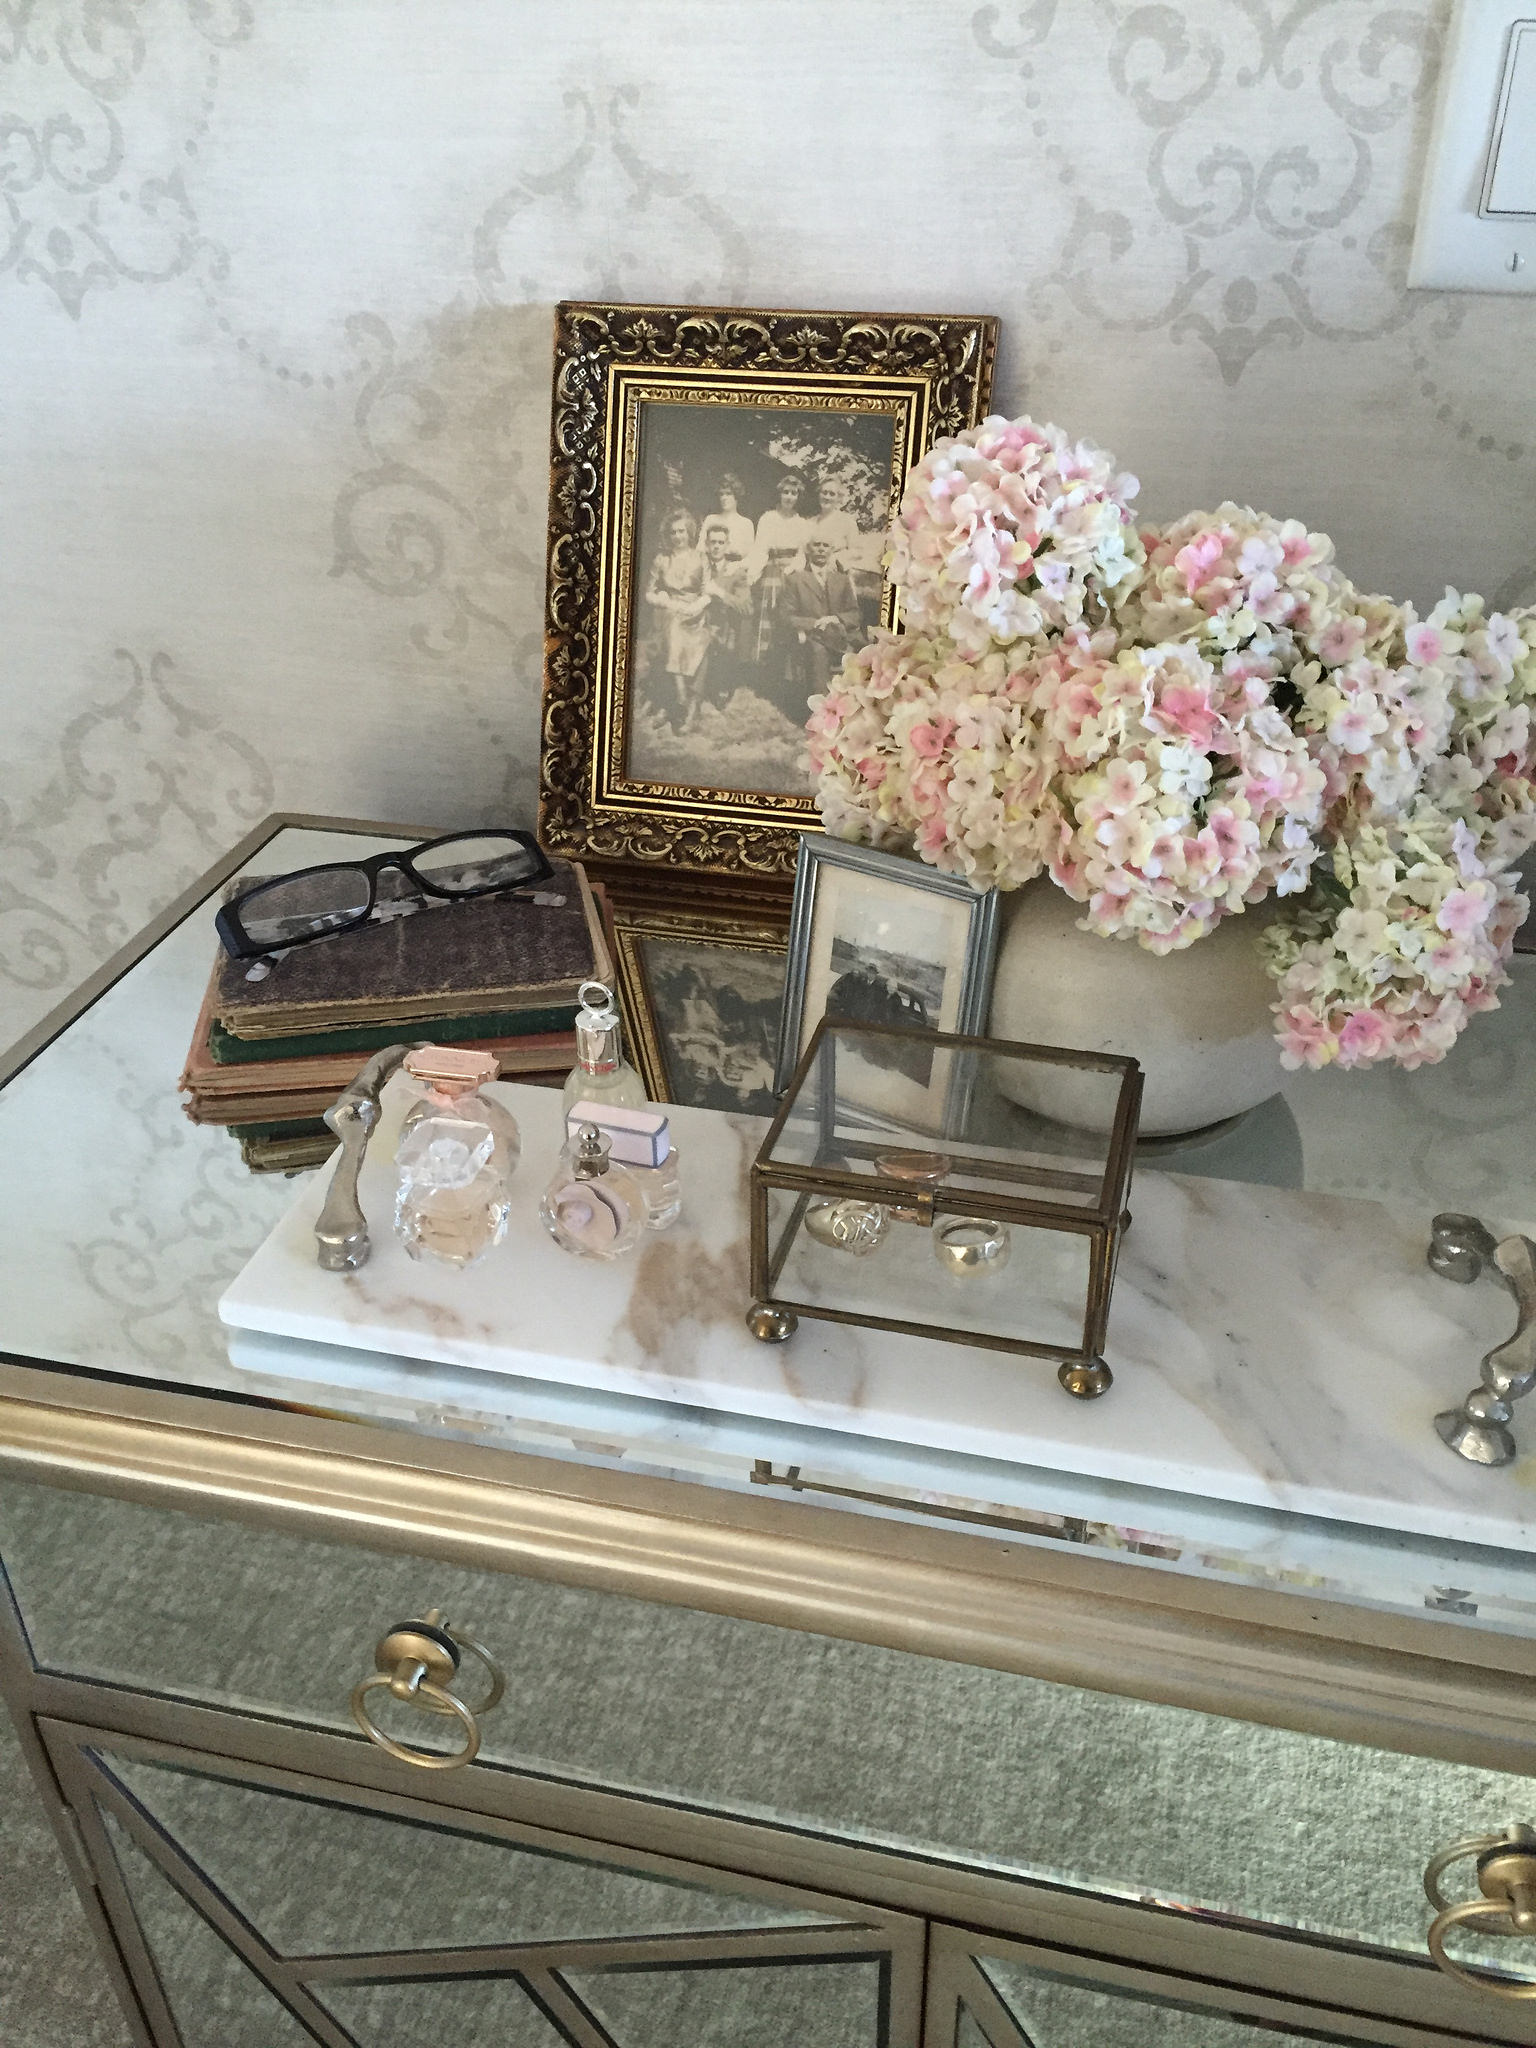 Table scape on mirrored chest features pretty flowers and a vintage family photo